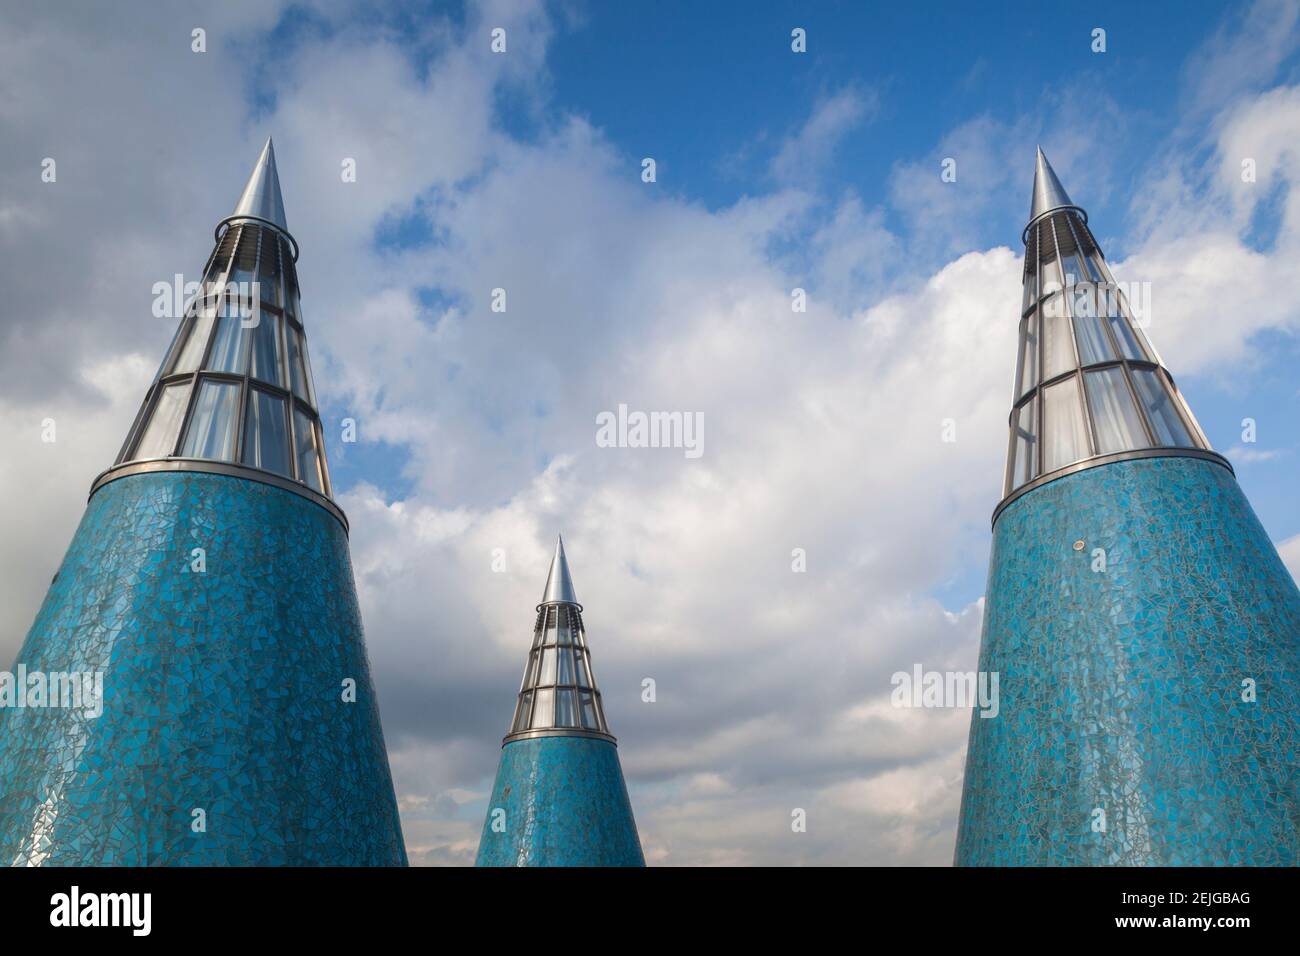 Rooftop towers at museum of technology and art, Bundeskunsthalle, Museumsmeile, Bonn, North Rhine-Westphalia, Germany Stock Photo